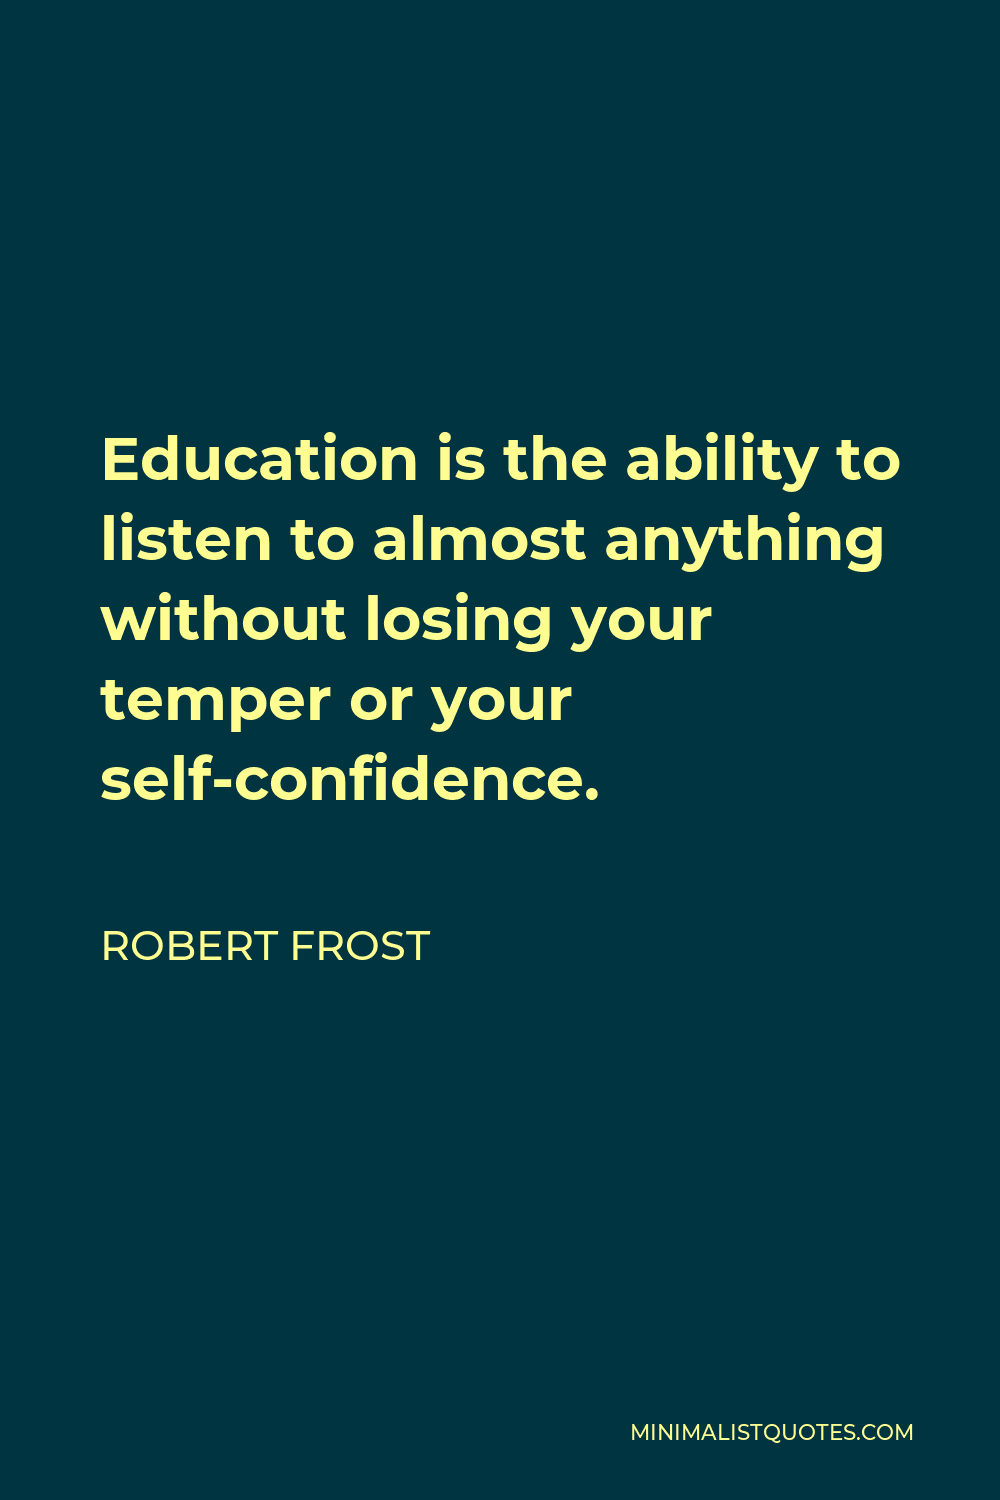 Robert Frost Quote - Education is the ability to listen to almost anything without losing your temper or your self-confidence.